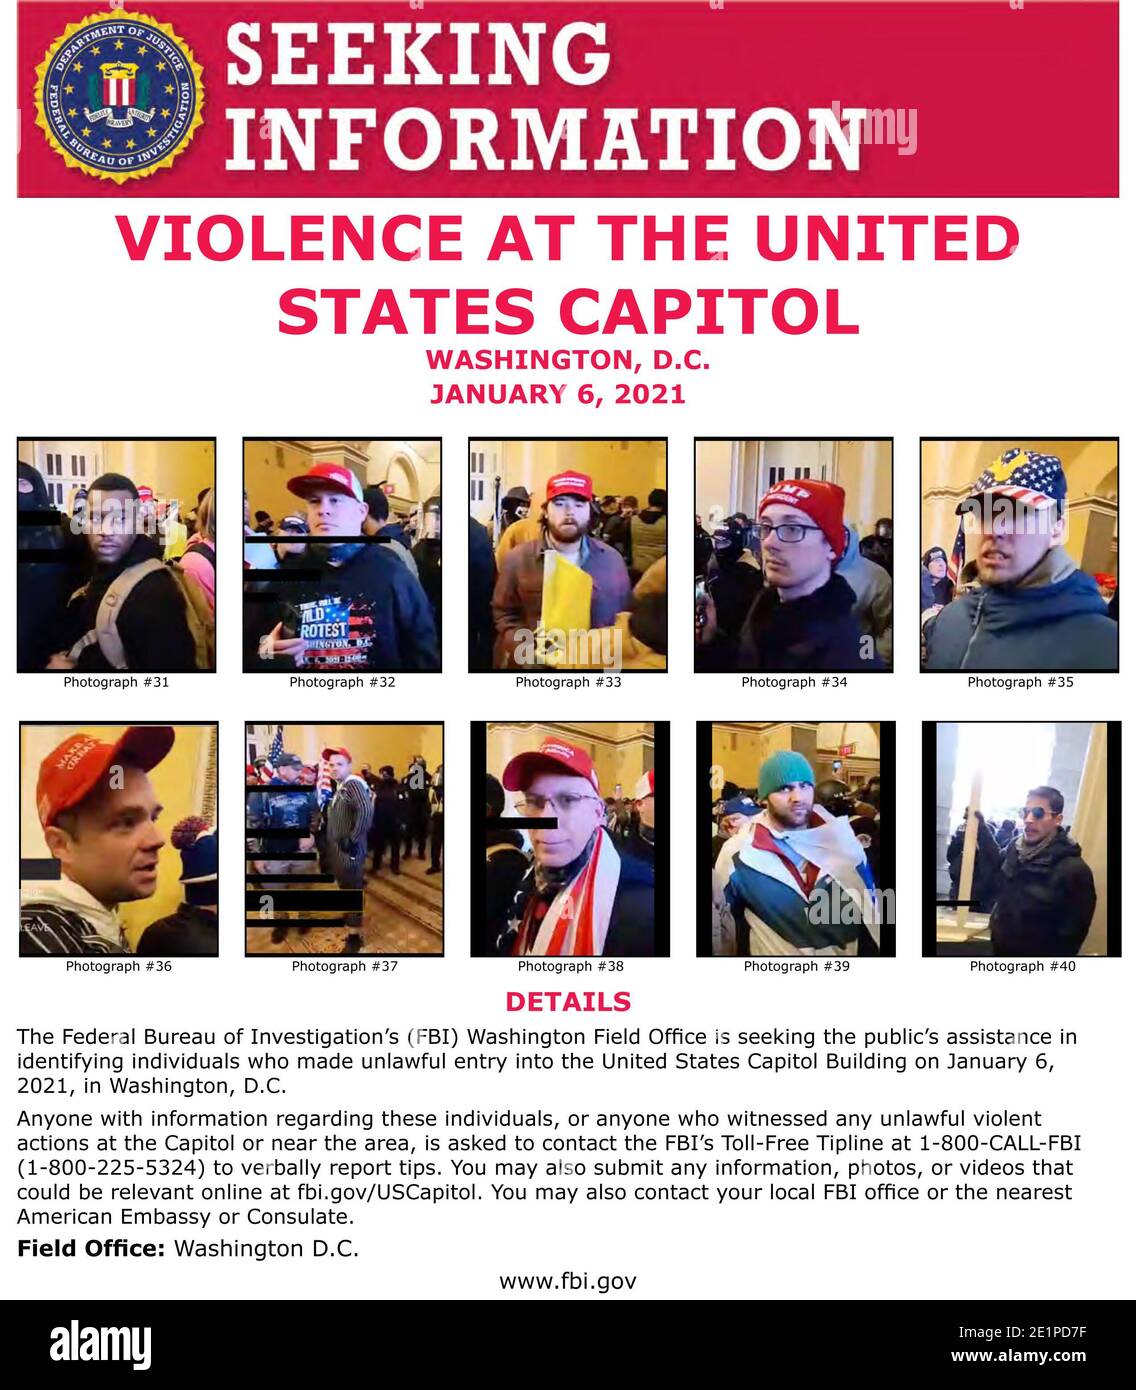 FBI Wanted posters seek to locate select rioters from the storming of the US Capitol. On January 6, 2021, rioters supporting United States President Donald Trump's attempts to overturn the 2020 presidential election stormed the U.S. Capitol. Stock Photo